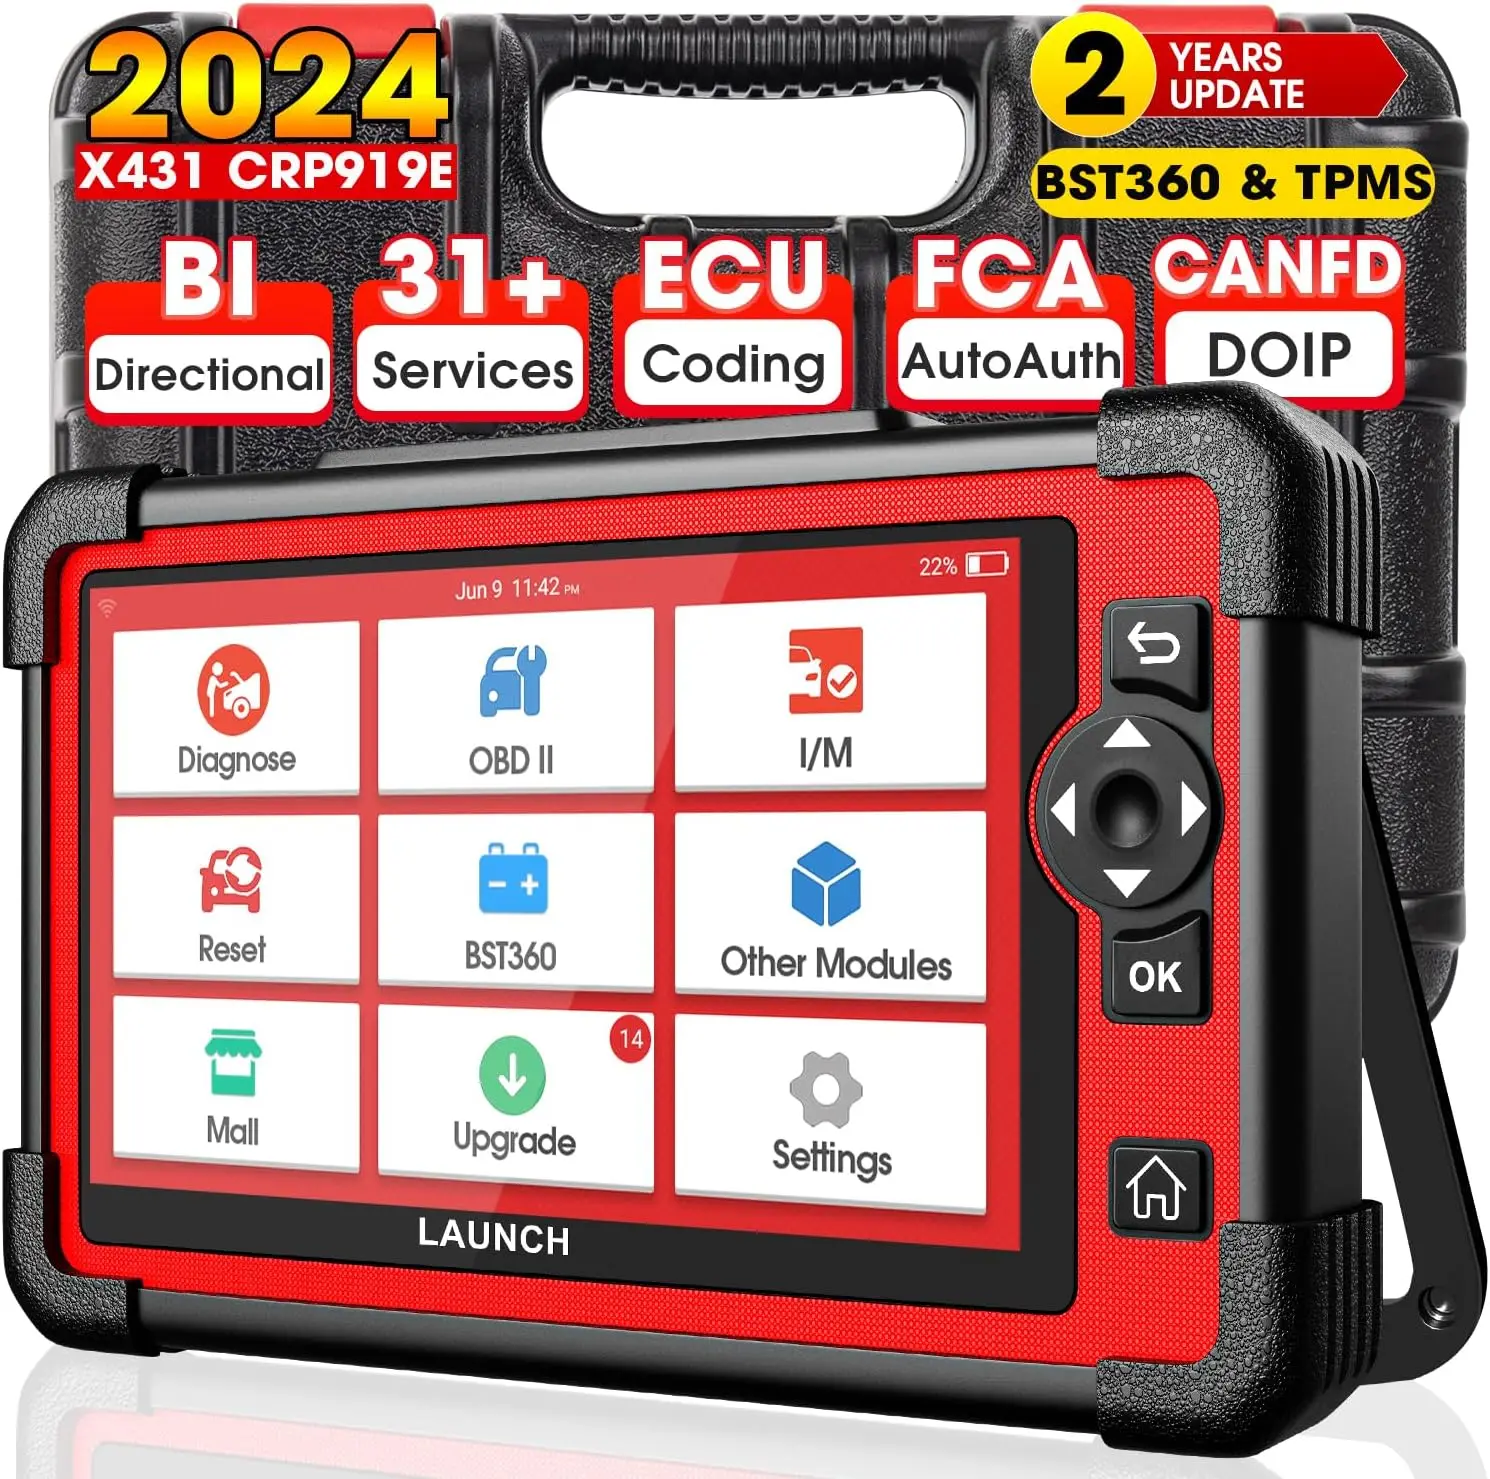 

EU Version LAUNCH CRP919E Car Diagnostic Tool Full System Automotive Scanner Active Test CANFD/DIOP with 29+ Reset Function